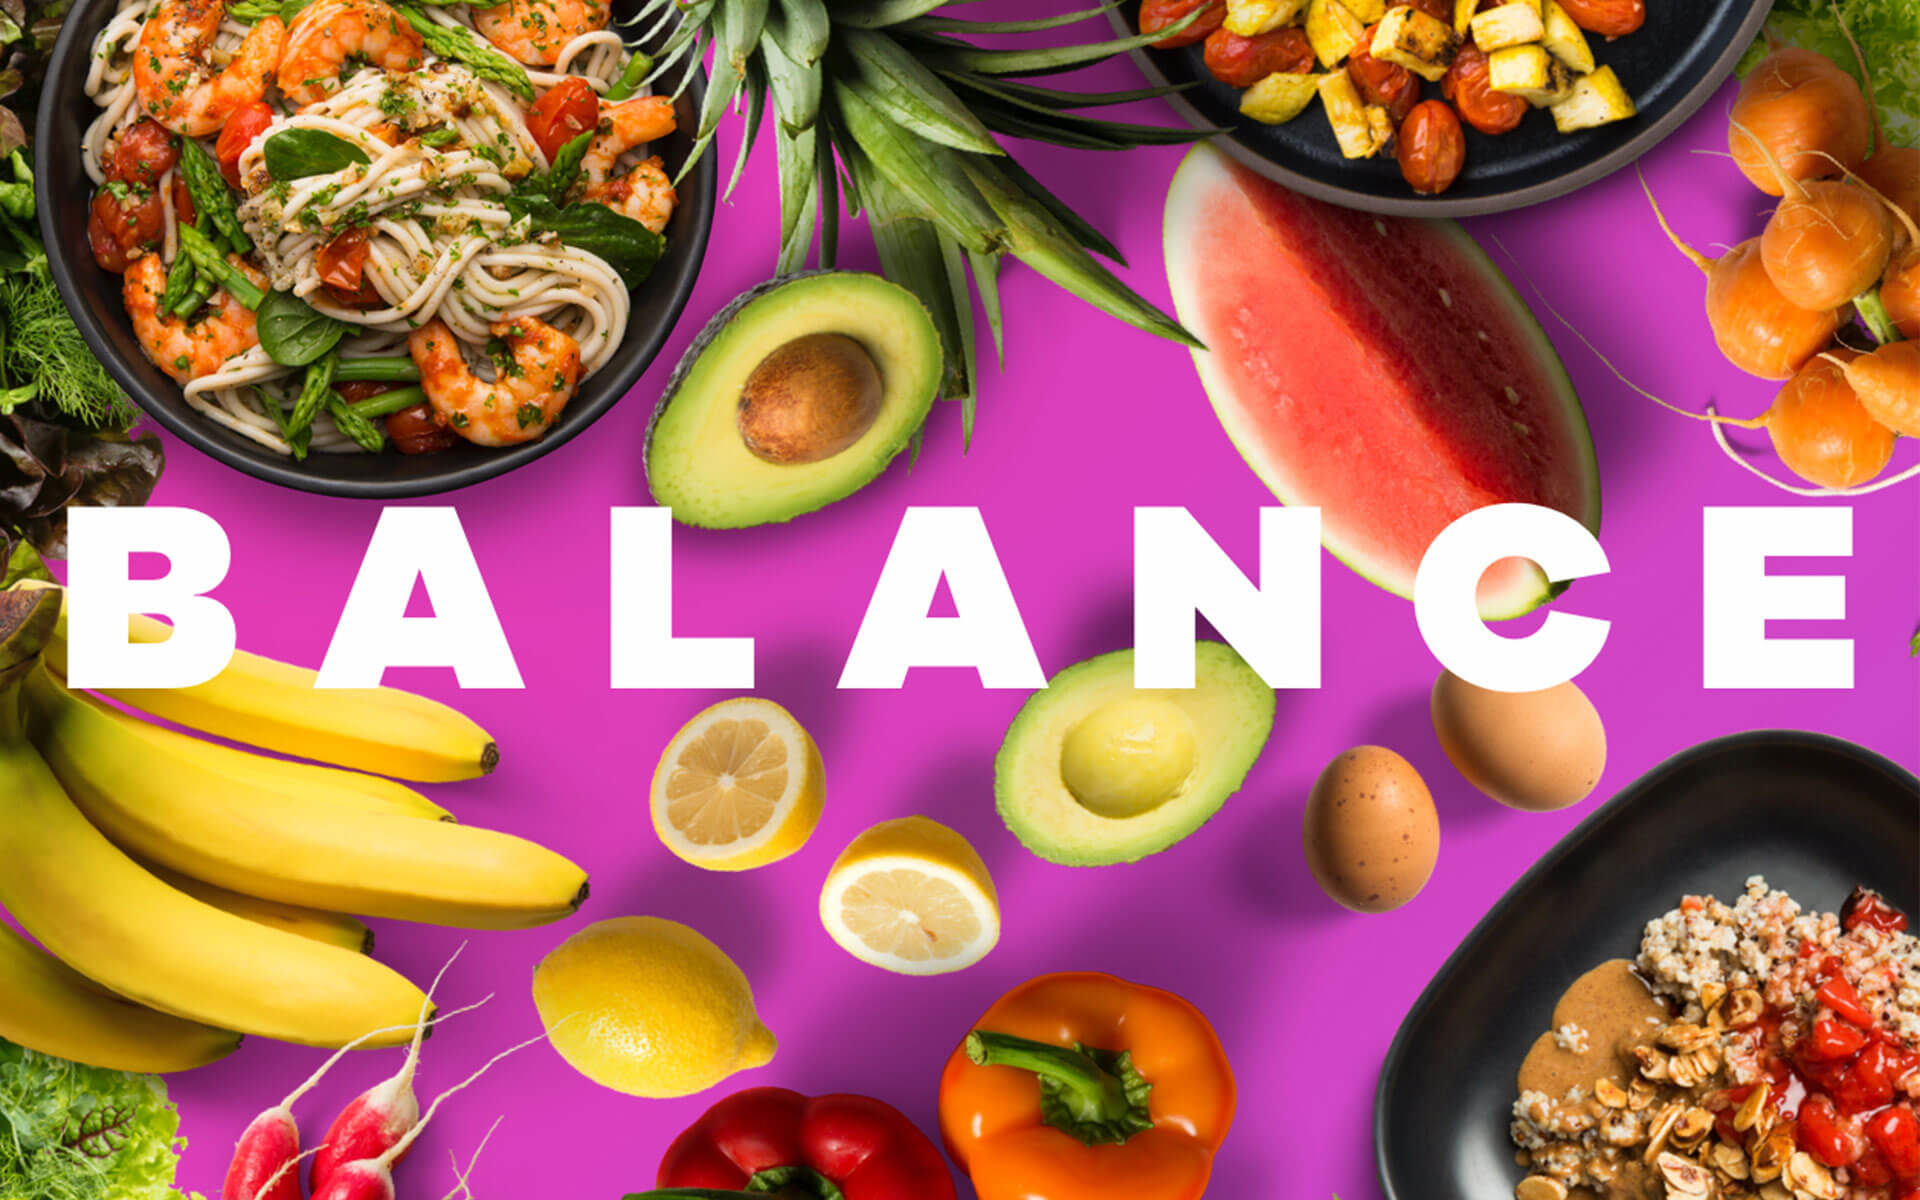 What to Expect on Your Balance Meal Plan